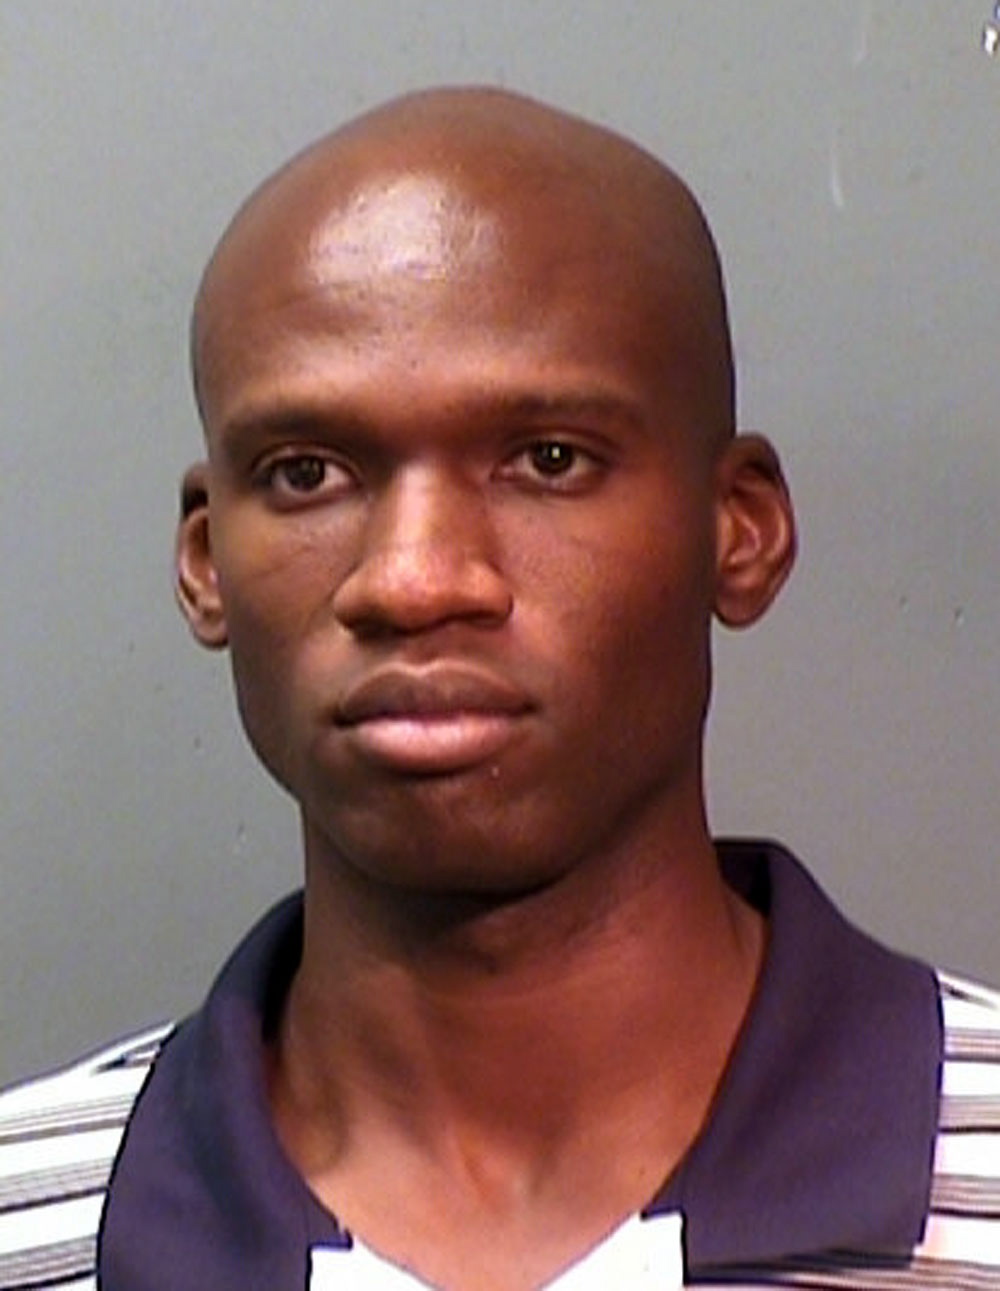 Aaron Alexis, arrested in September 2010 on suspicion of discharging a firearm in the city limits, has been identified by the FBI as the gunman in the Monday shooting rampage at at the Washington Navy Yard in Washington.